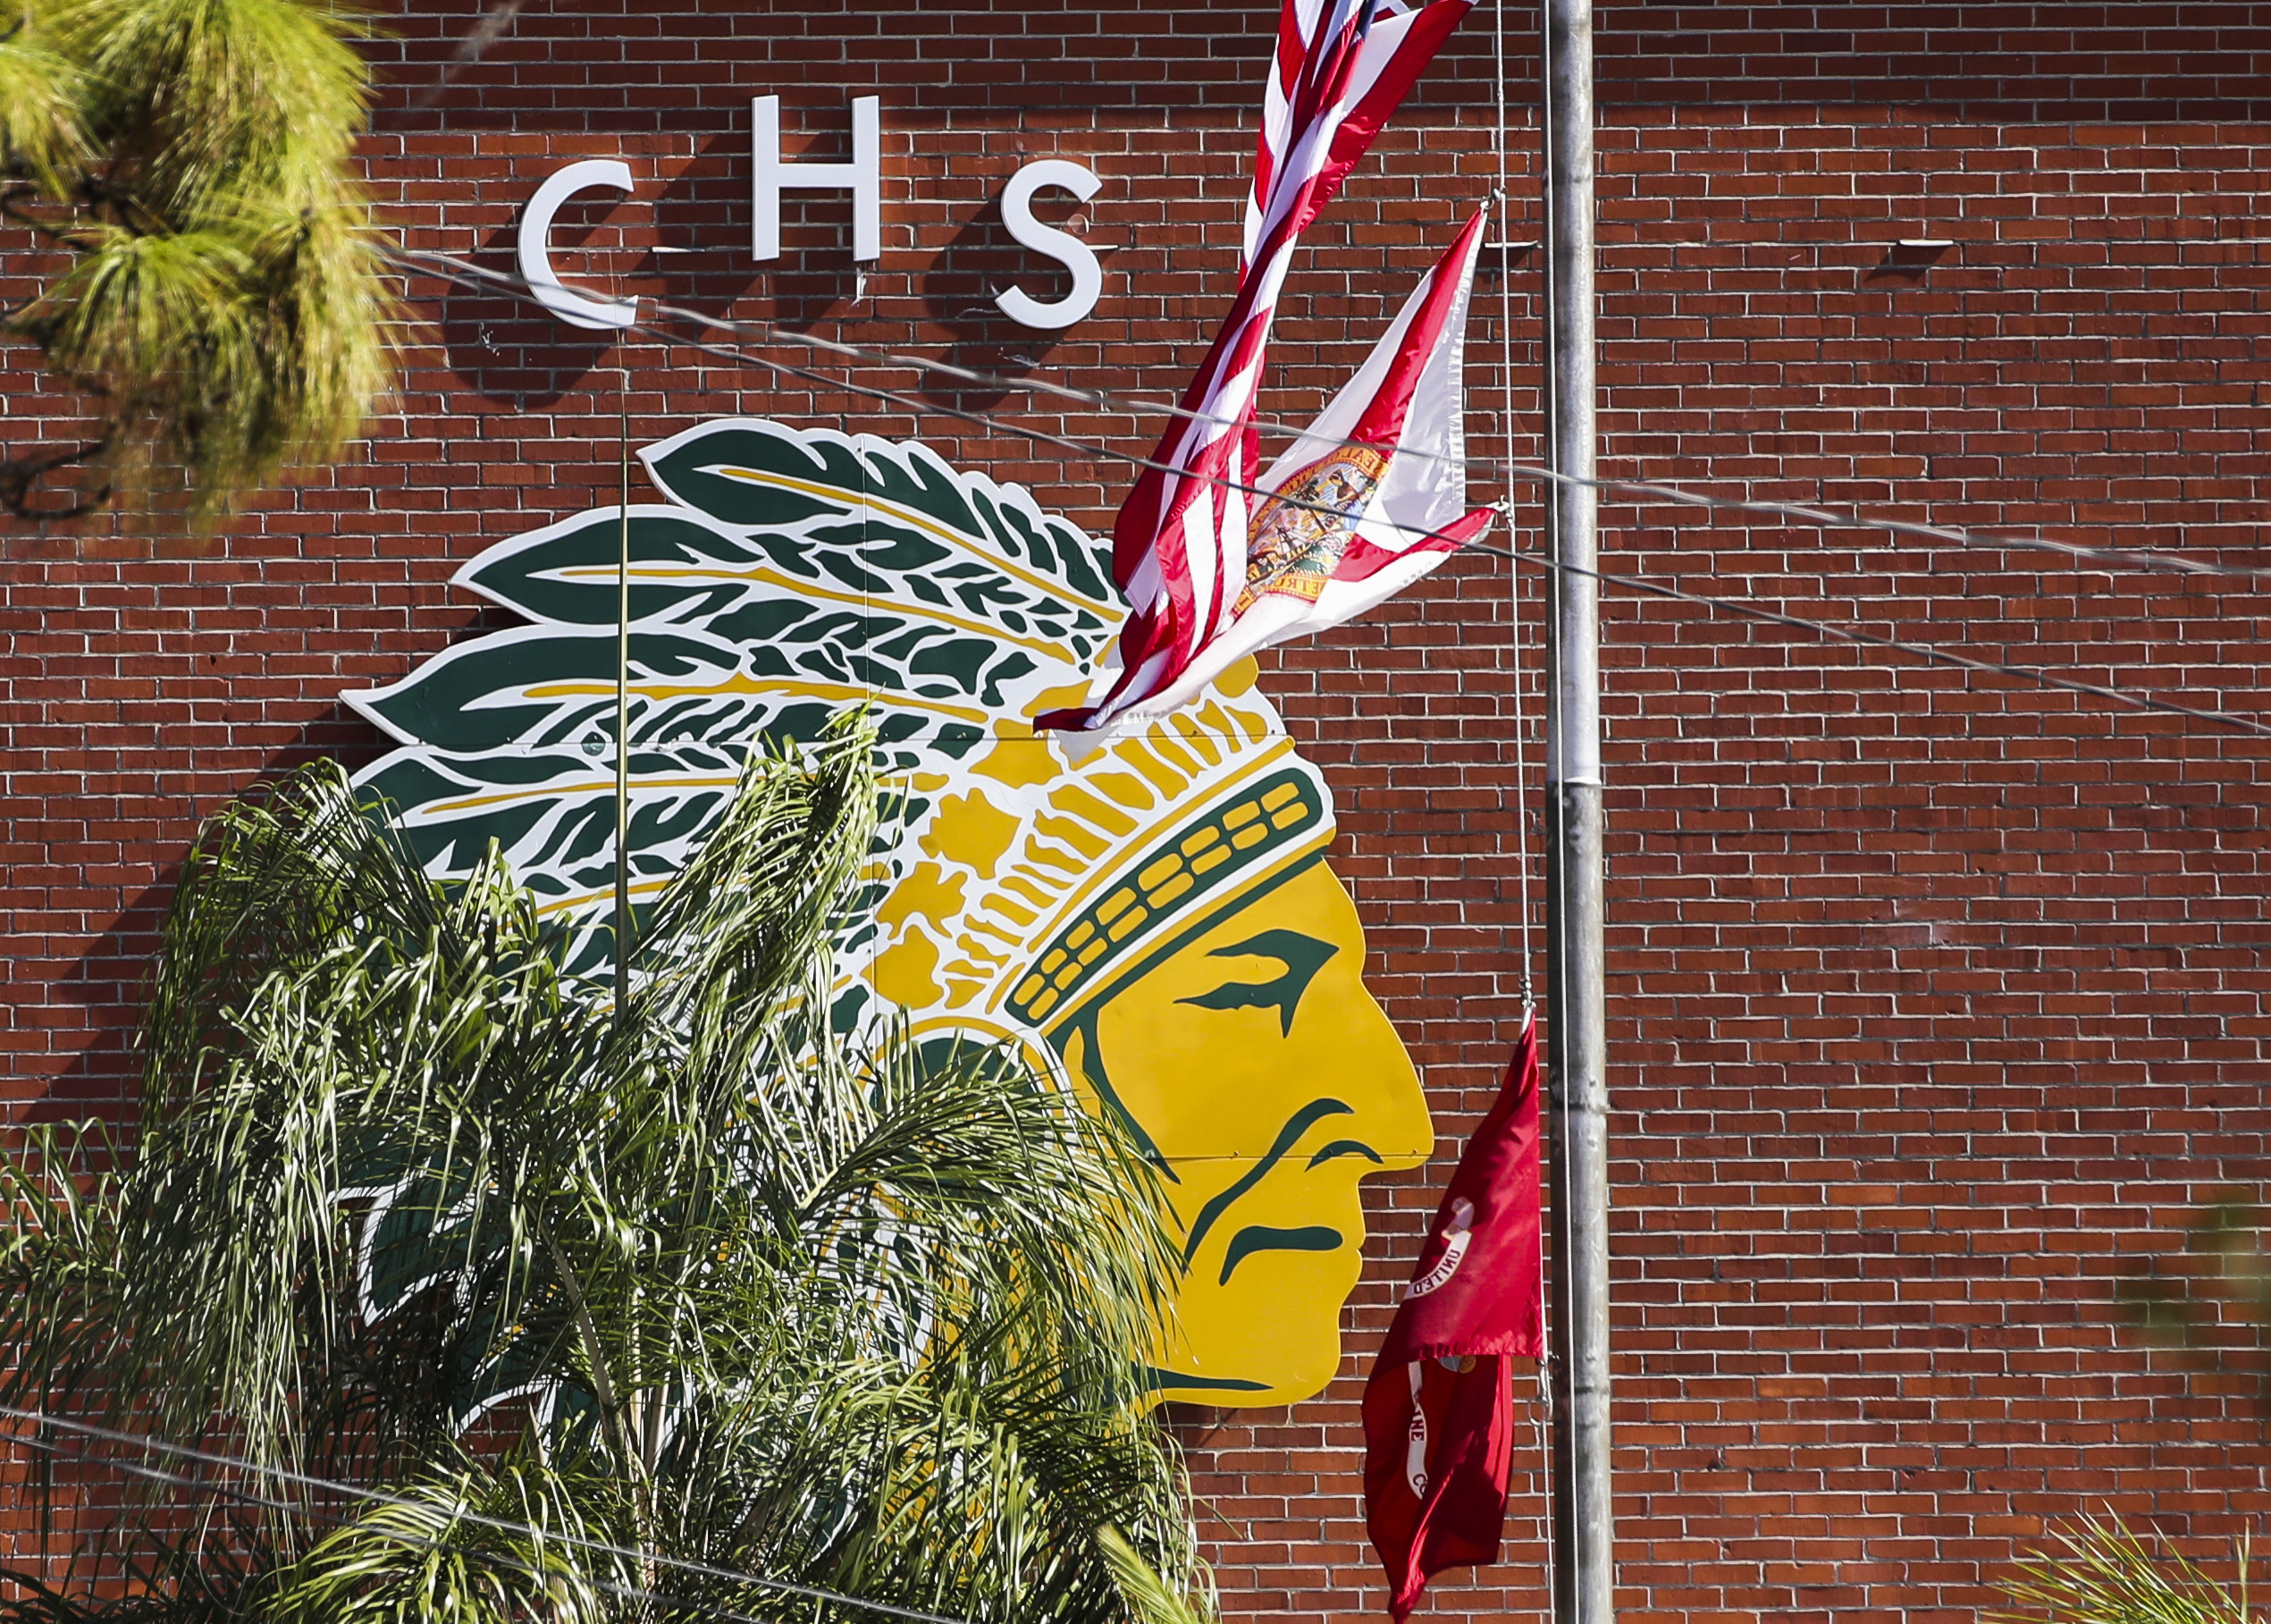 Native American mascots: Time for schools to change?